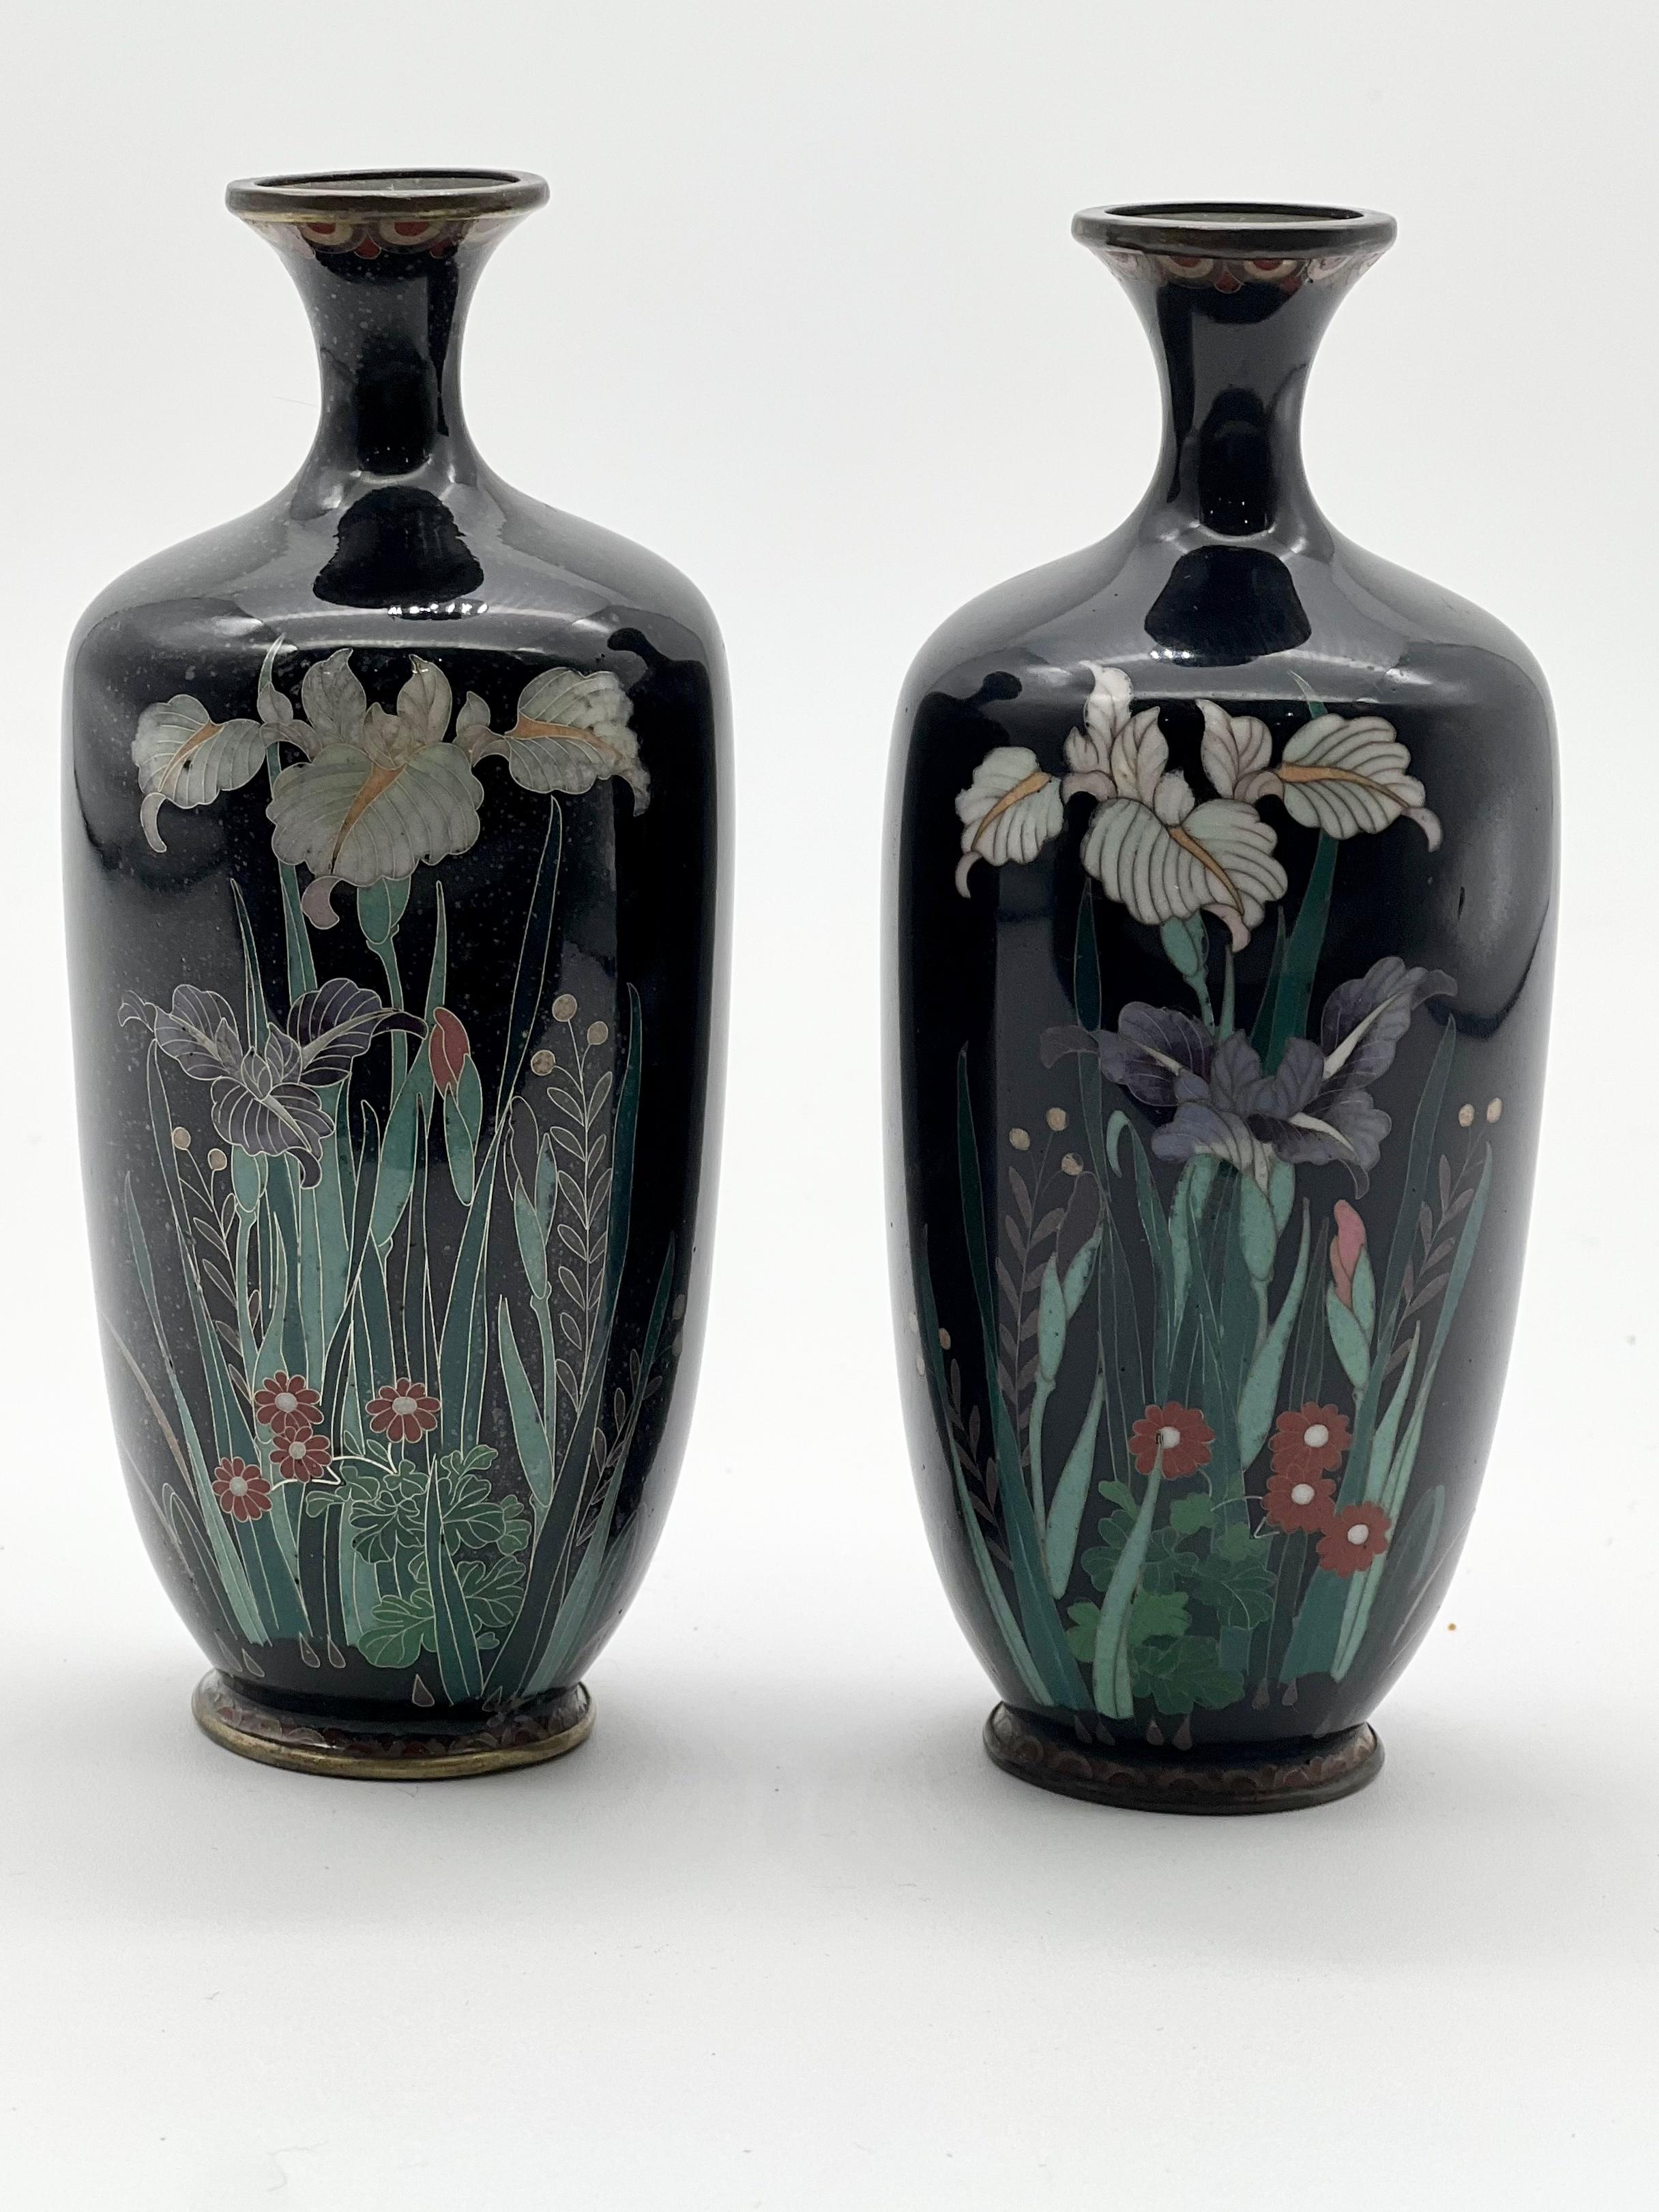 A pair of Japanese Cloisonné enamel ovoid vases by Hayashi Chuzo Kodenji Workshop, Meiji period.

Dark blue ovoid and tapering vases with small flared necks, mirror finish, decorated with fine silver wire and polychrome enamels with blooming iris